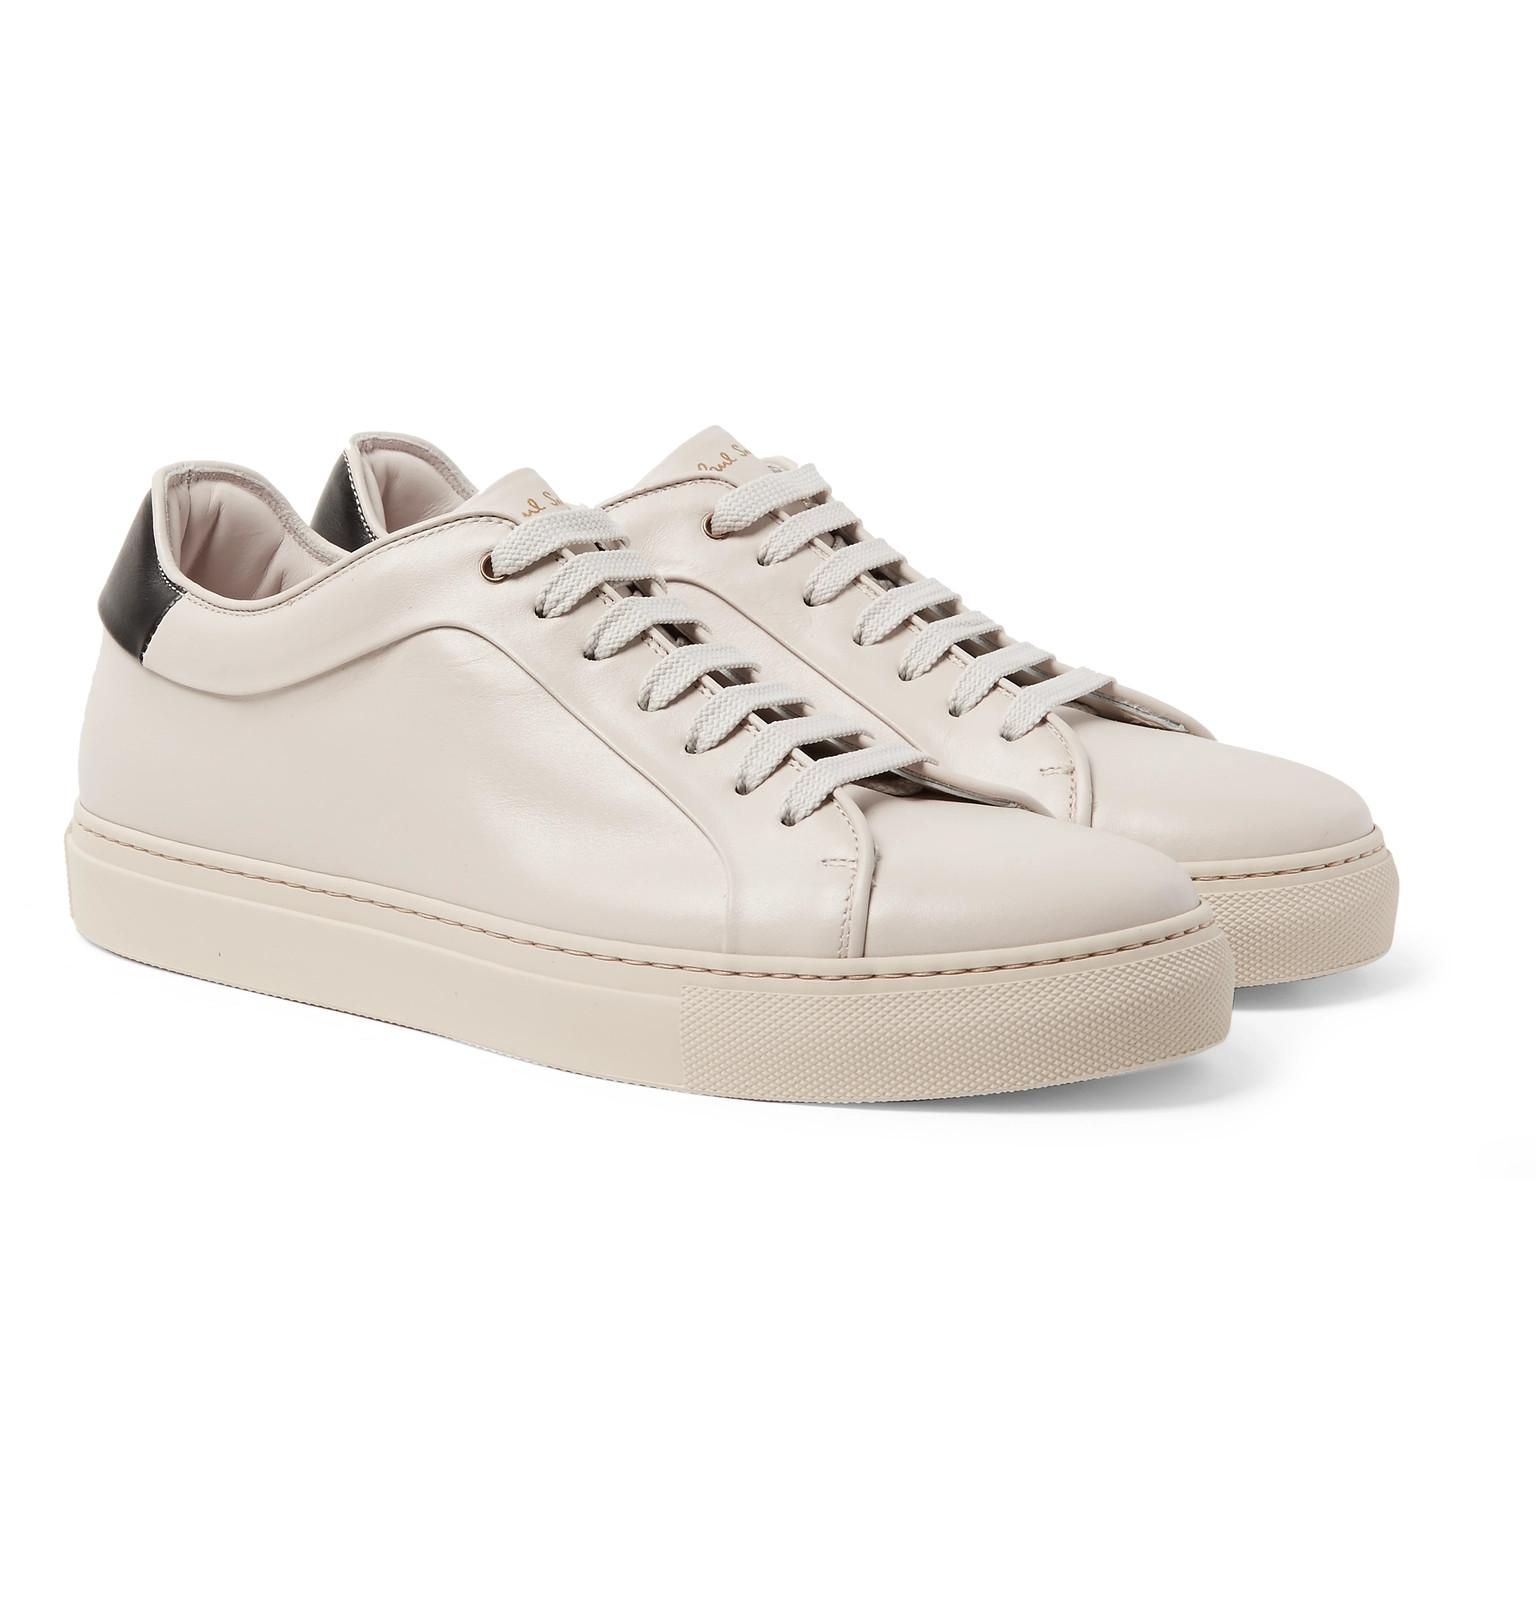 Paul Smith Basso Leather Sneakers in White for Men - Lyst